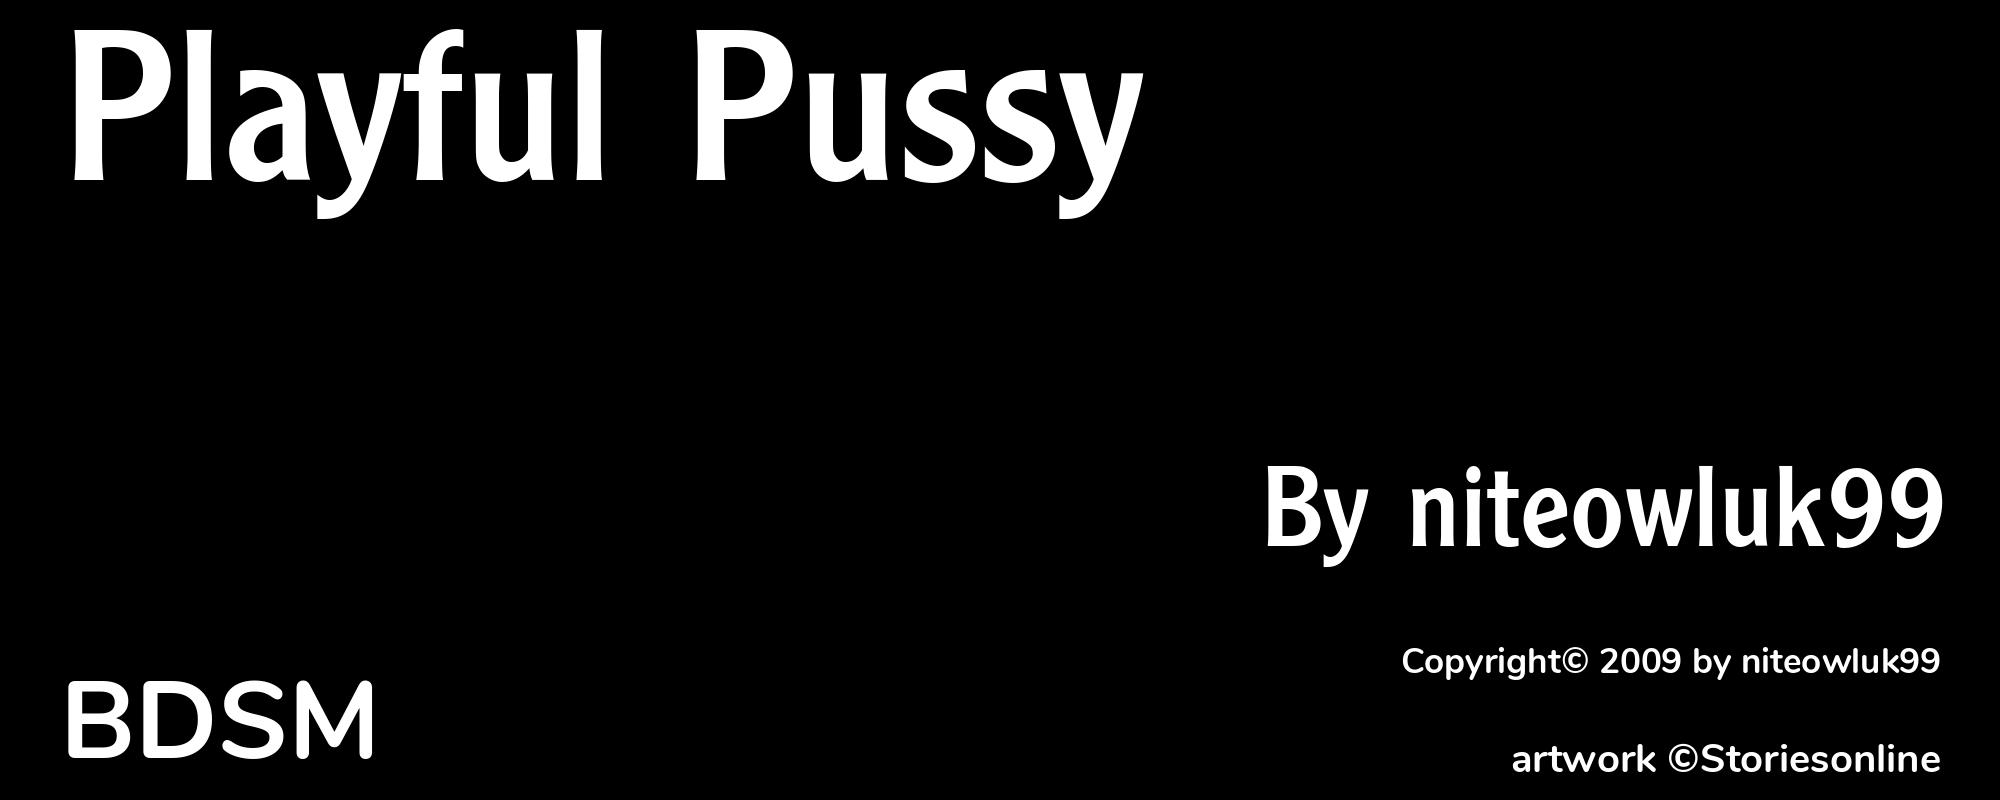 Playful Pussy - Cover